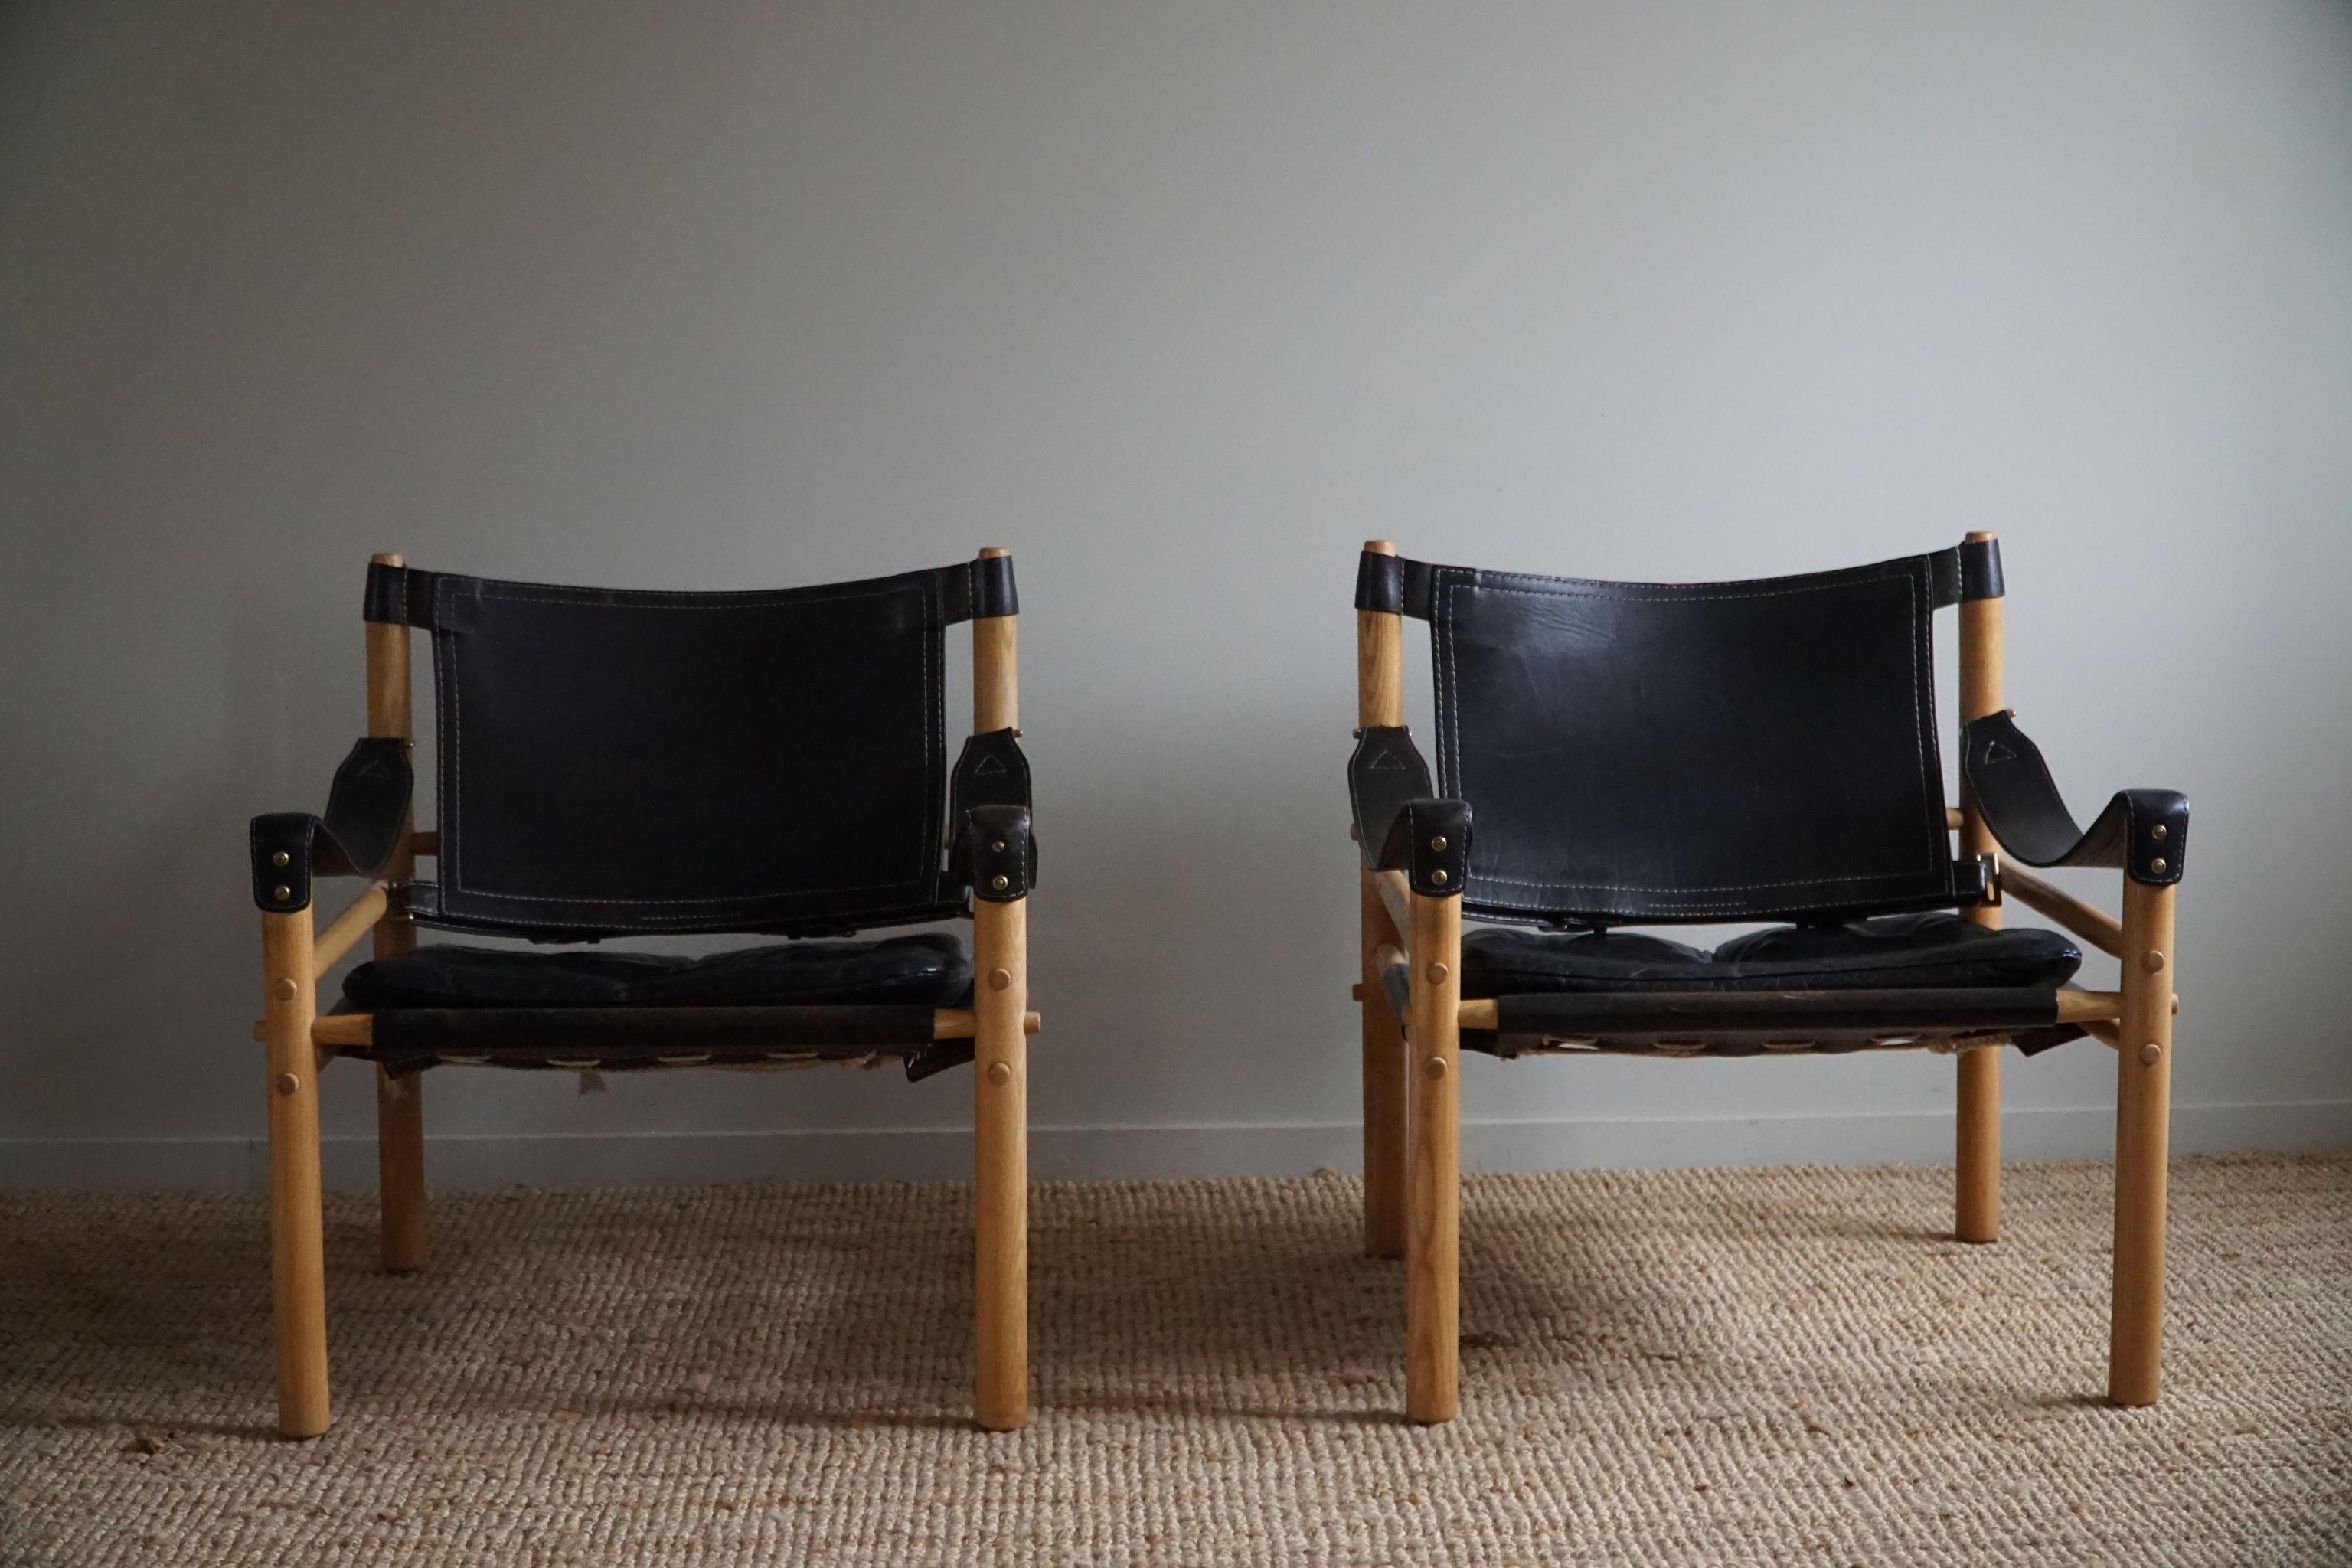 20th Century Pair of Sirocco Lounge Chairs in Ash & Leather, Arne Norell, Ab Aneby, 1960s